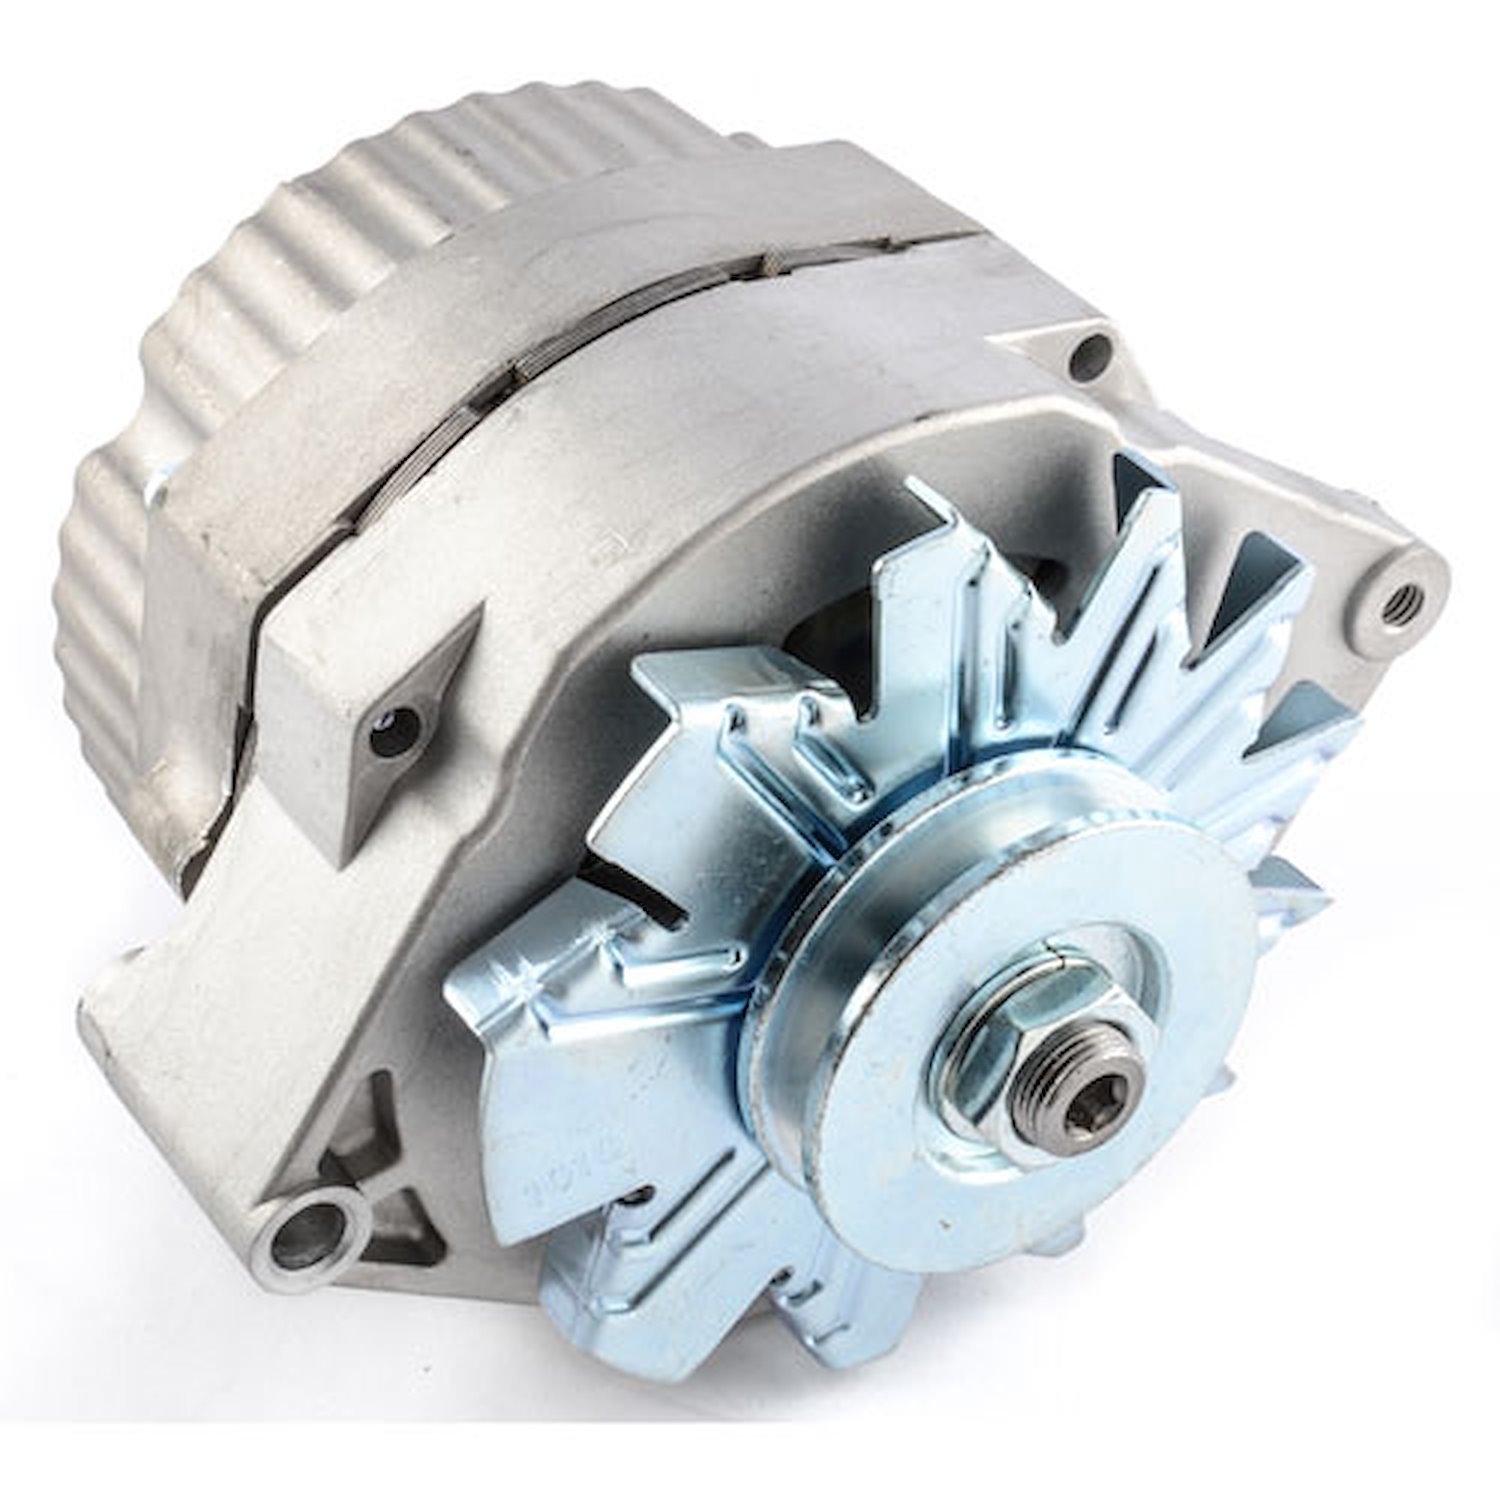 3-Wire GM 10si Alternator 70 Amps in Natural Satin Finish